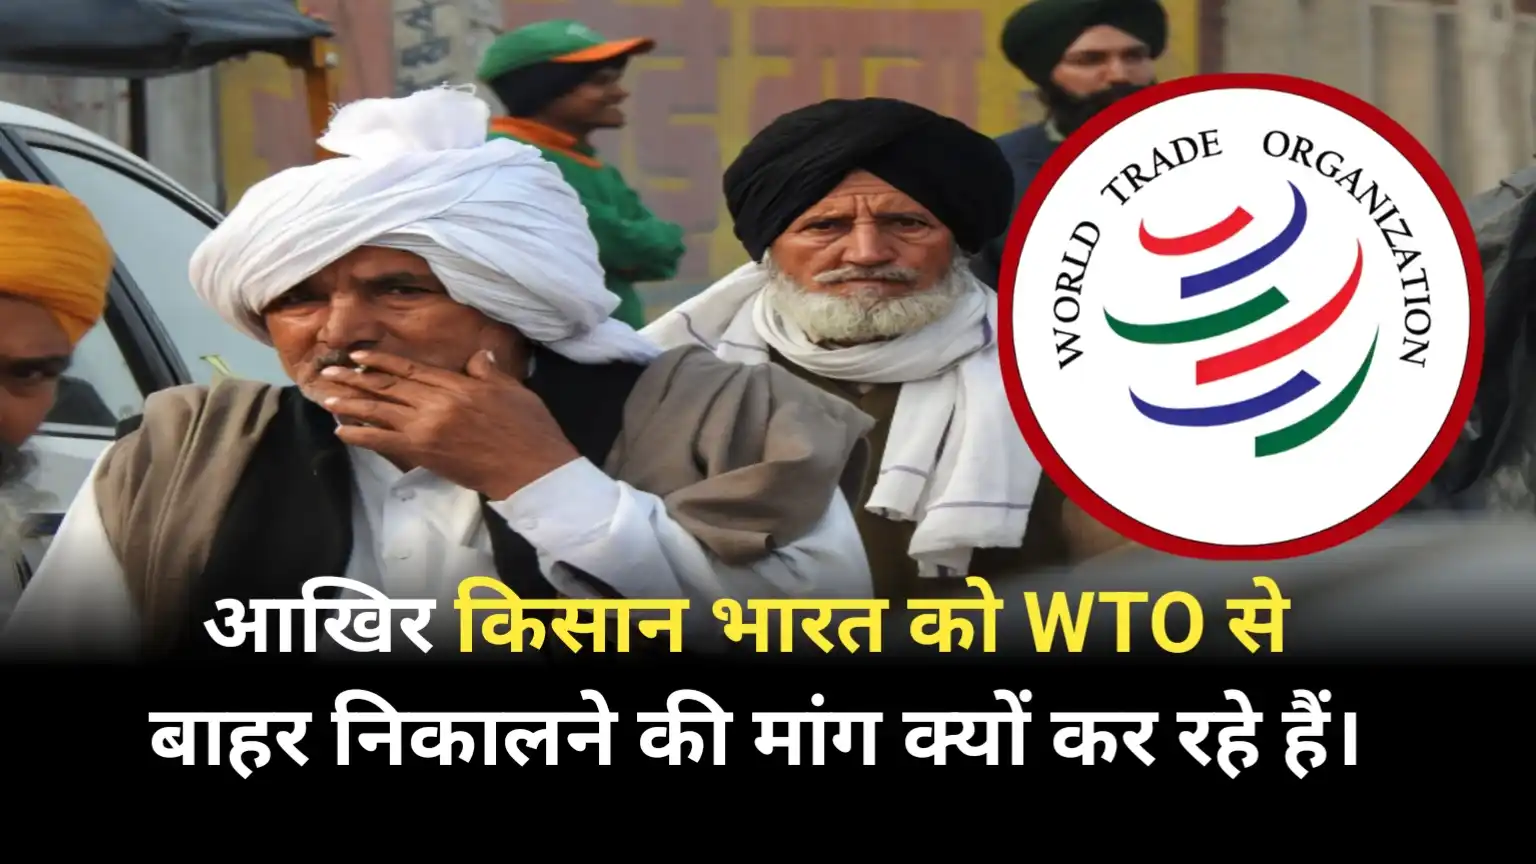 Why are farmers demanding India's withdrawal from WTO